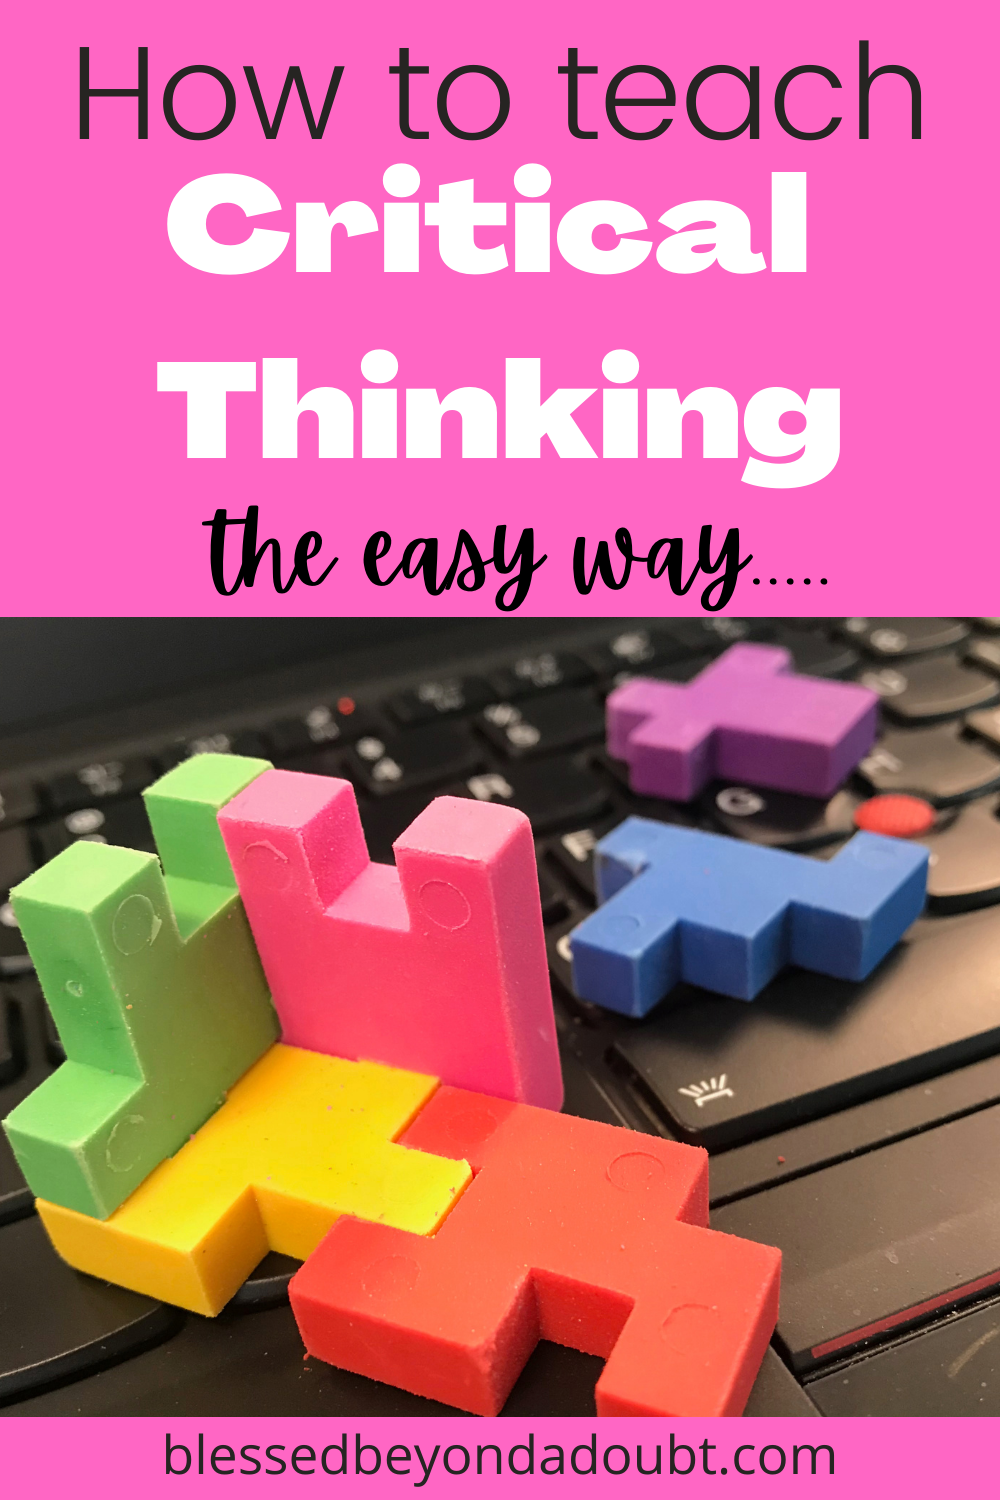 Hurry and grab this FREE critical thinking ebook that is filled with critical thinking activities and suggestions. Be sure to bookmark this page. Hurry! Freebies are only for a limited time. #criticalthinkingactivities #criticalthinkingactivitiesforkids #criticalthinkingactivitiesforkidsfree #criticalthinkingactivitiesforkidsworksheets #criticalthinkingactivitiesforkidsworksheetsstudent